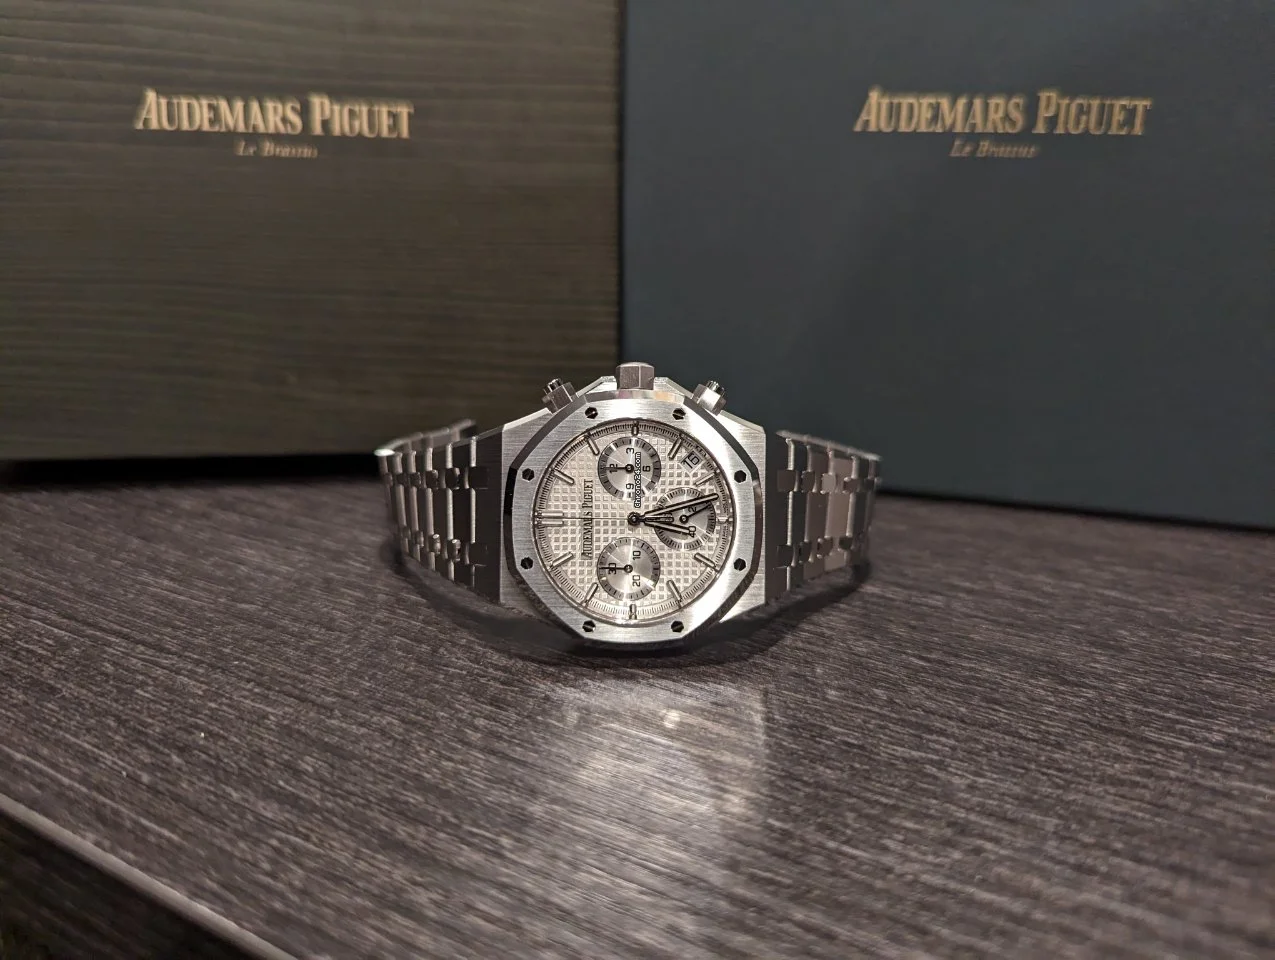 Audemars Piguet Royal Oak Chronograph NEW 26240ST White Dial... for $53,750  for sale from a Seller on Chrono24